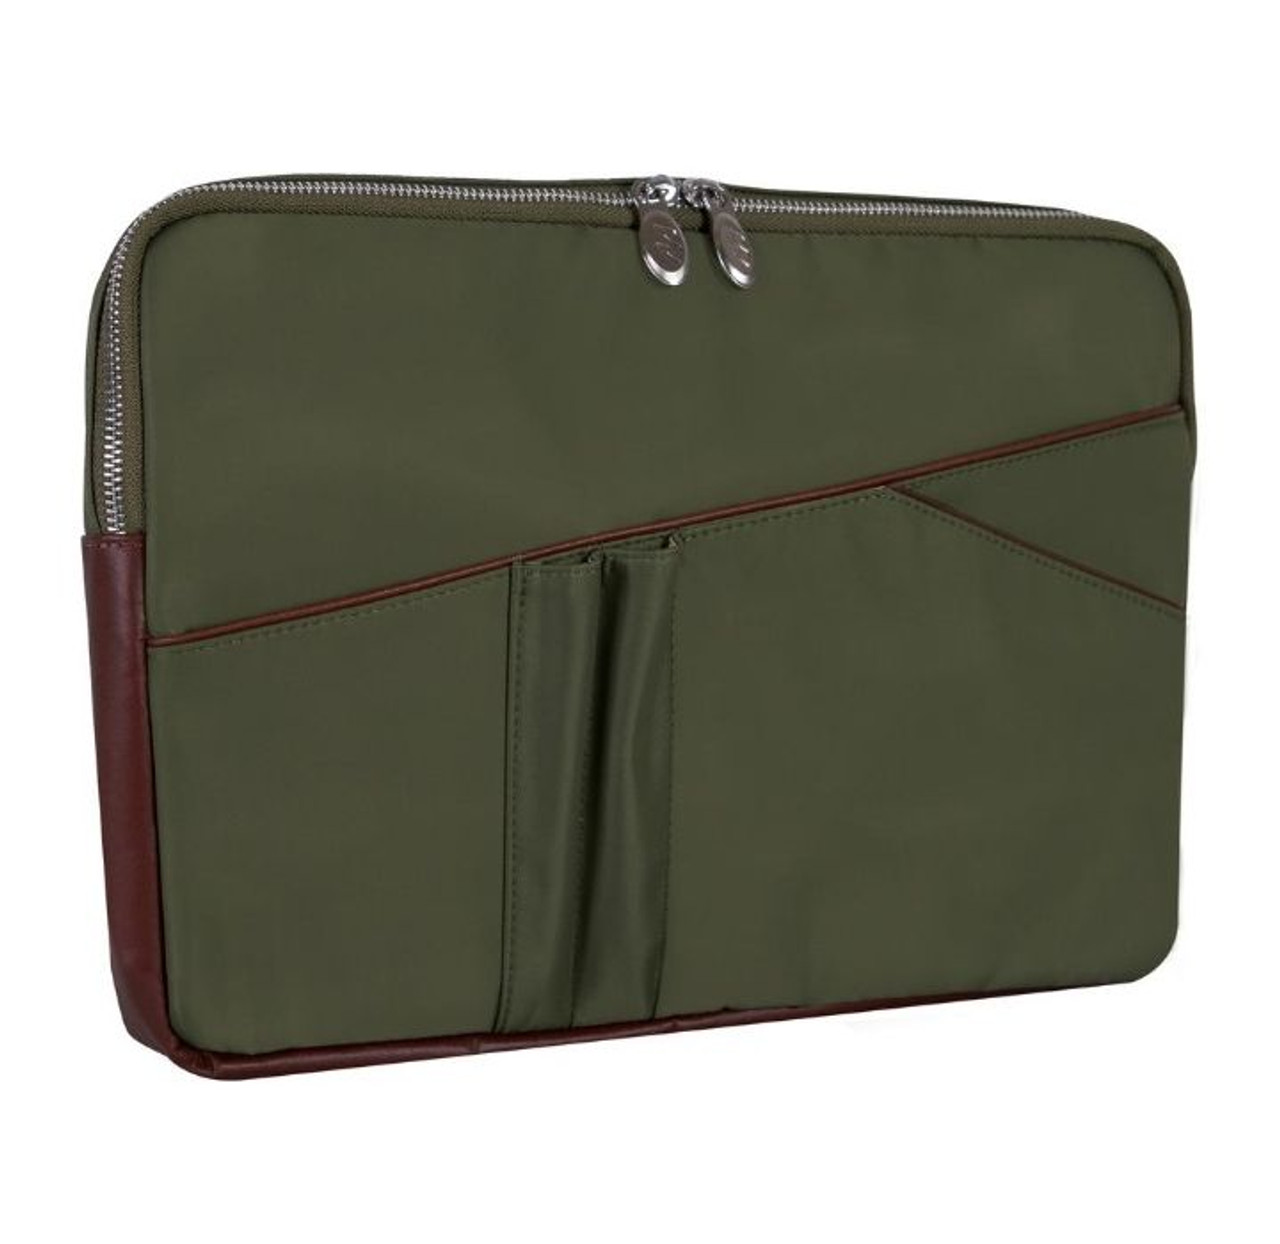 Crescent 14" Nylon Laptop Sleeve with Leather Accents  product image